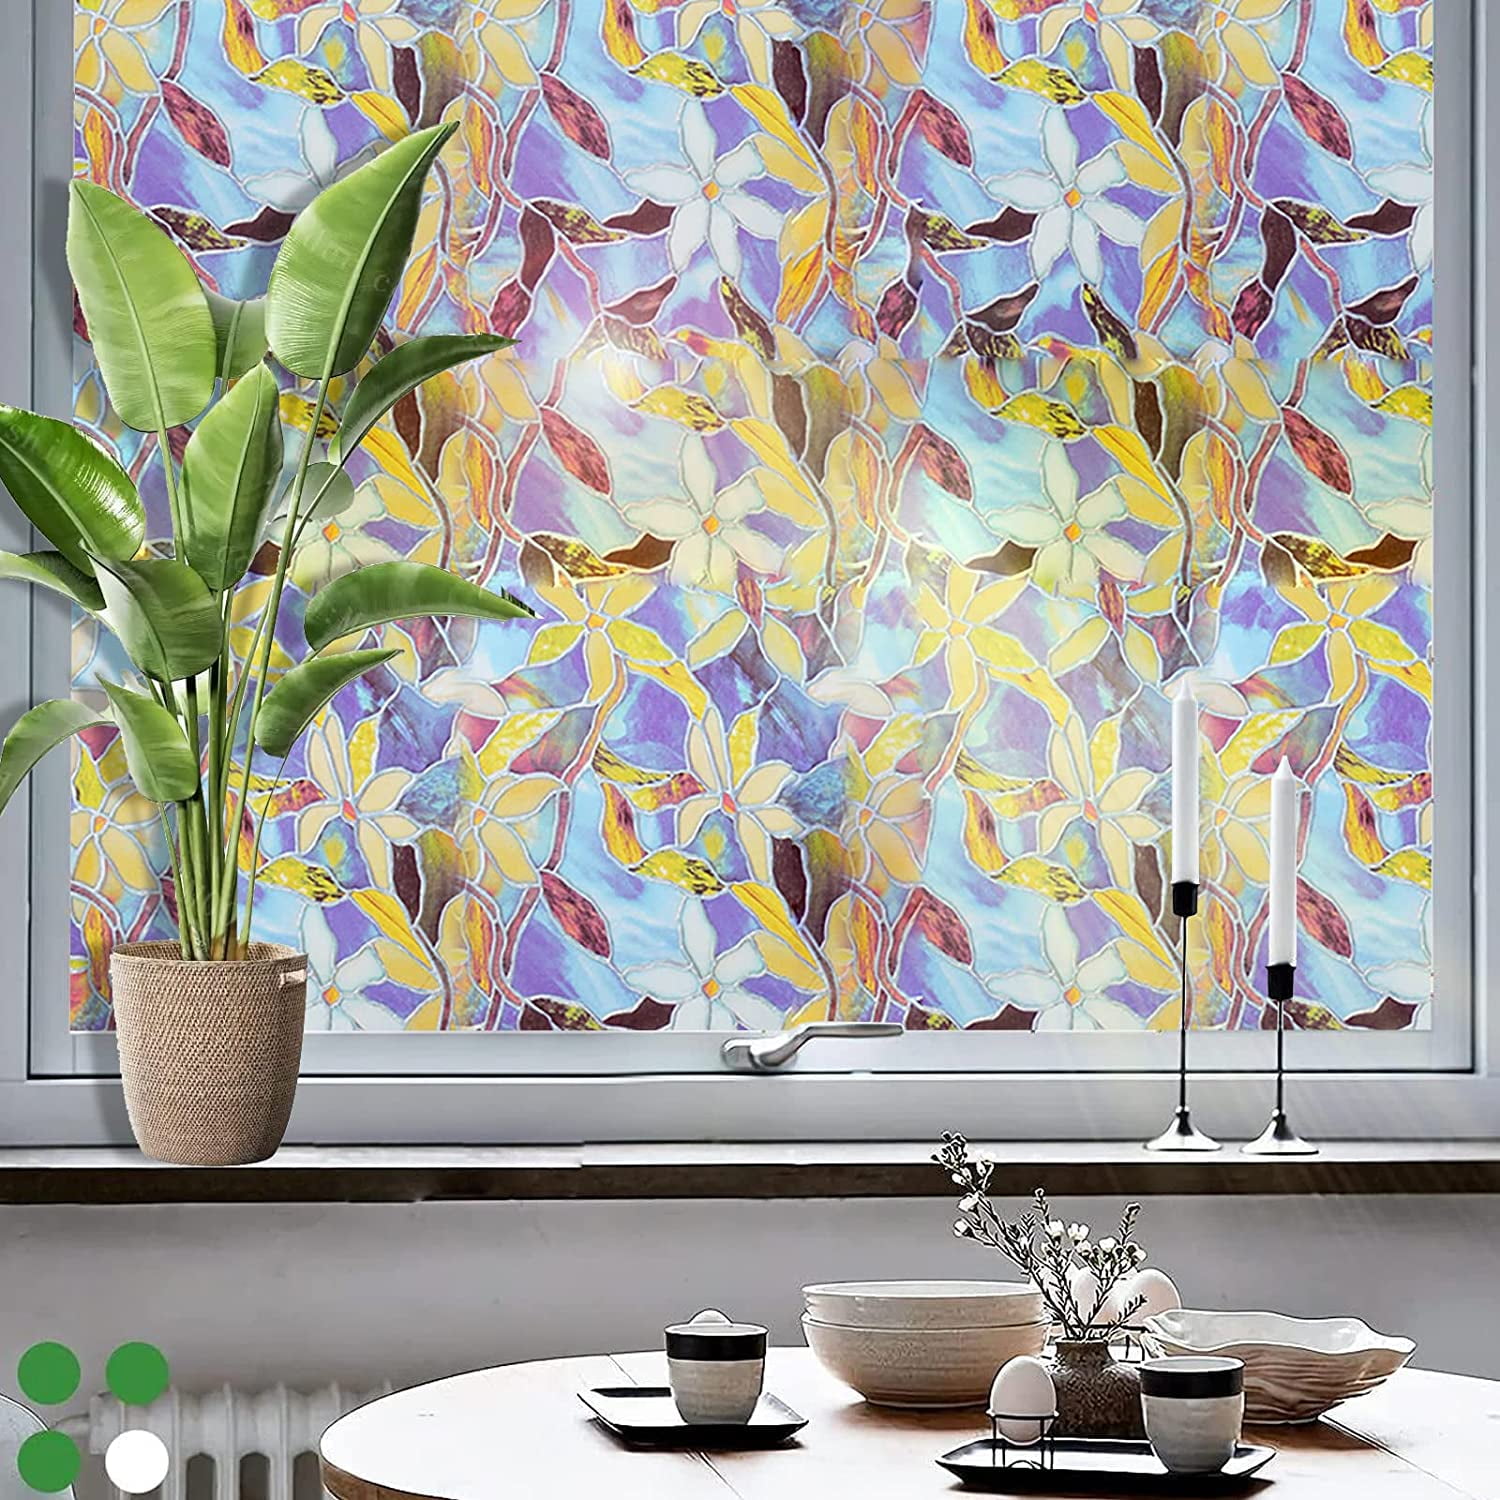 HOHOFILM 17.7x78.7 Colorful Glass Window Film Decorative Tint Chameleon Window Tint for Home Office Building Glass Decal Film